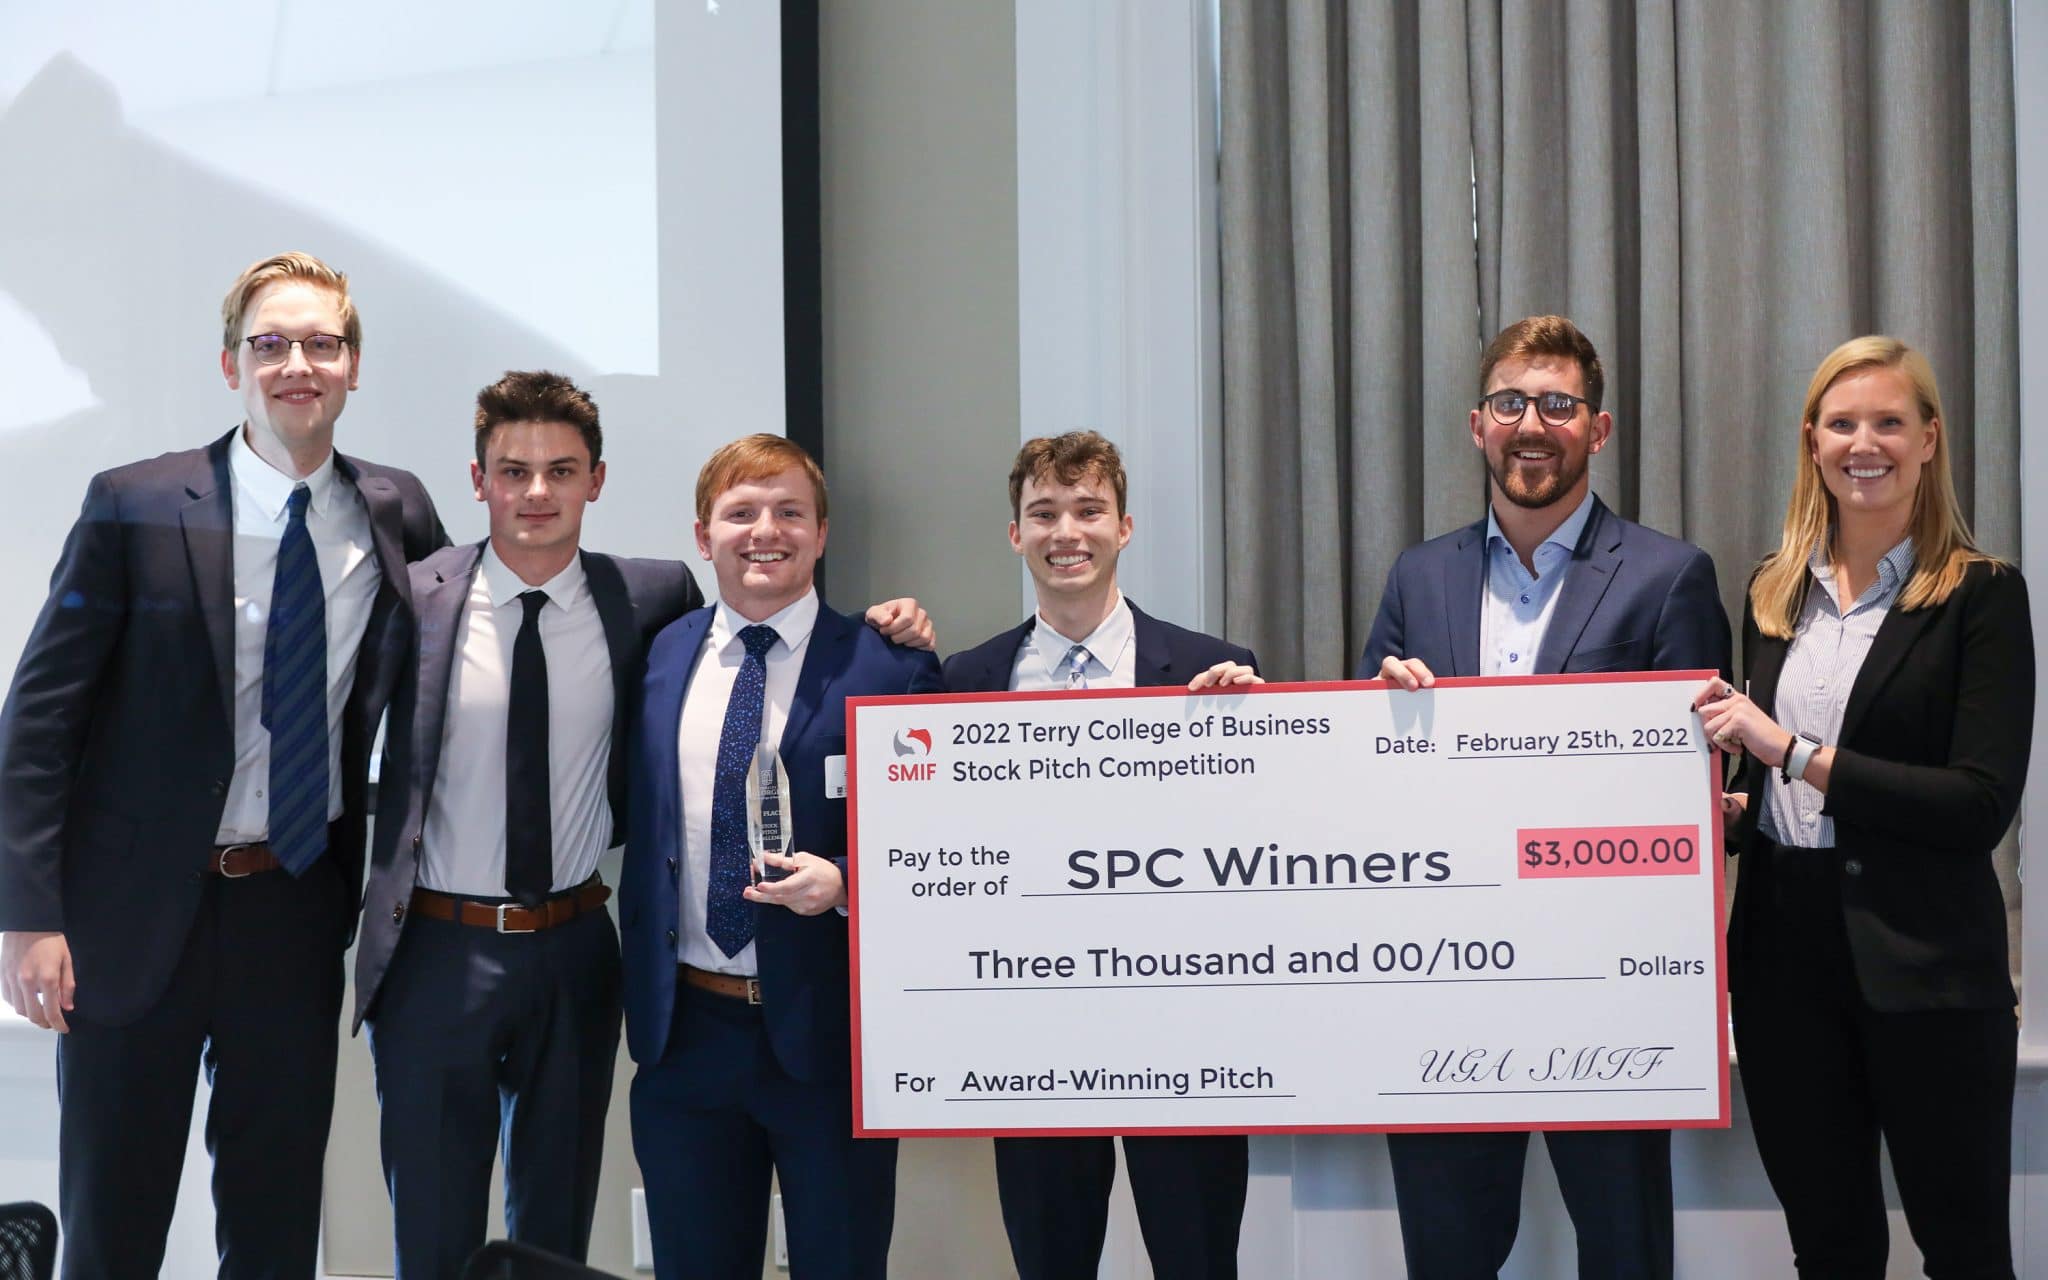 MSF students win UGA stock pitch competition Warrington